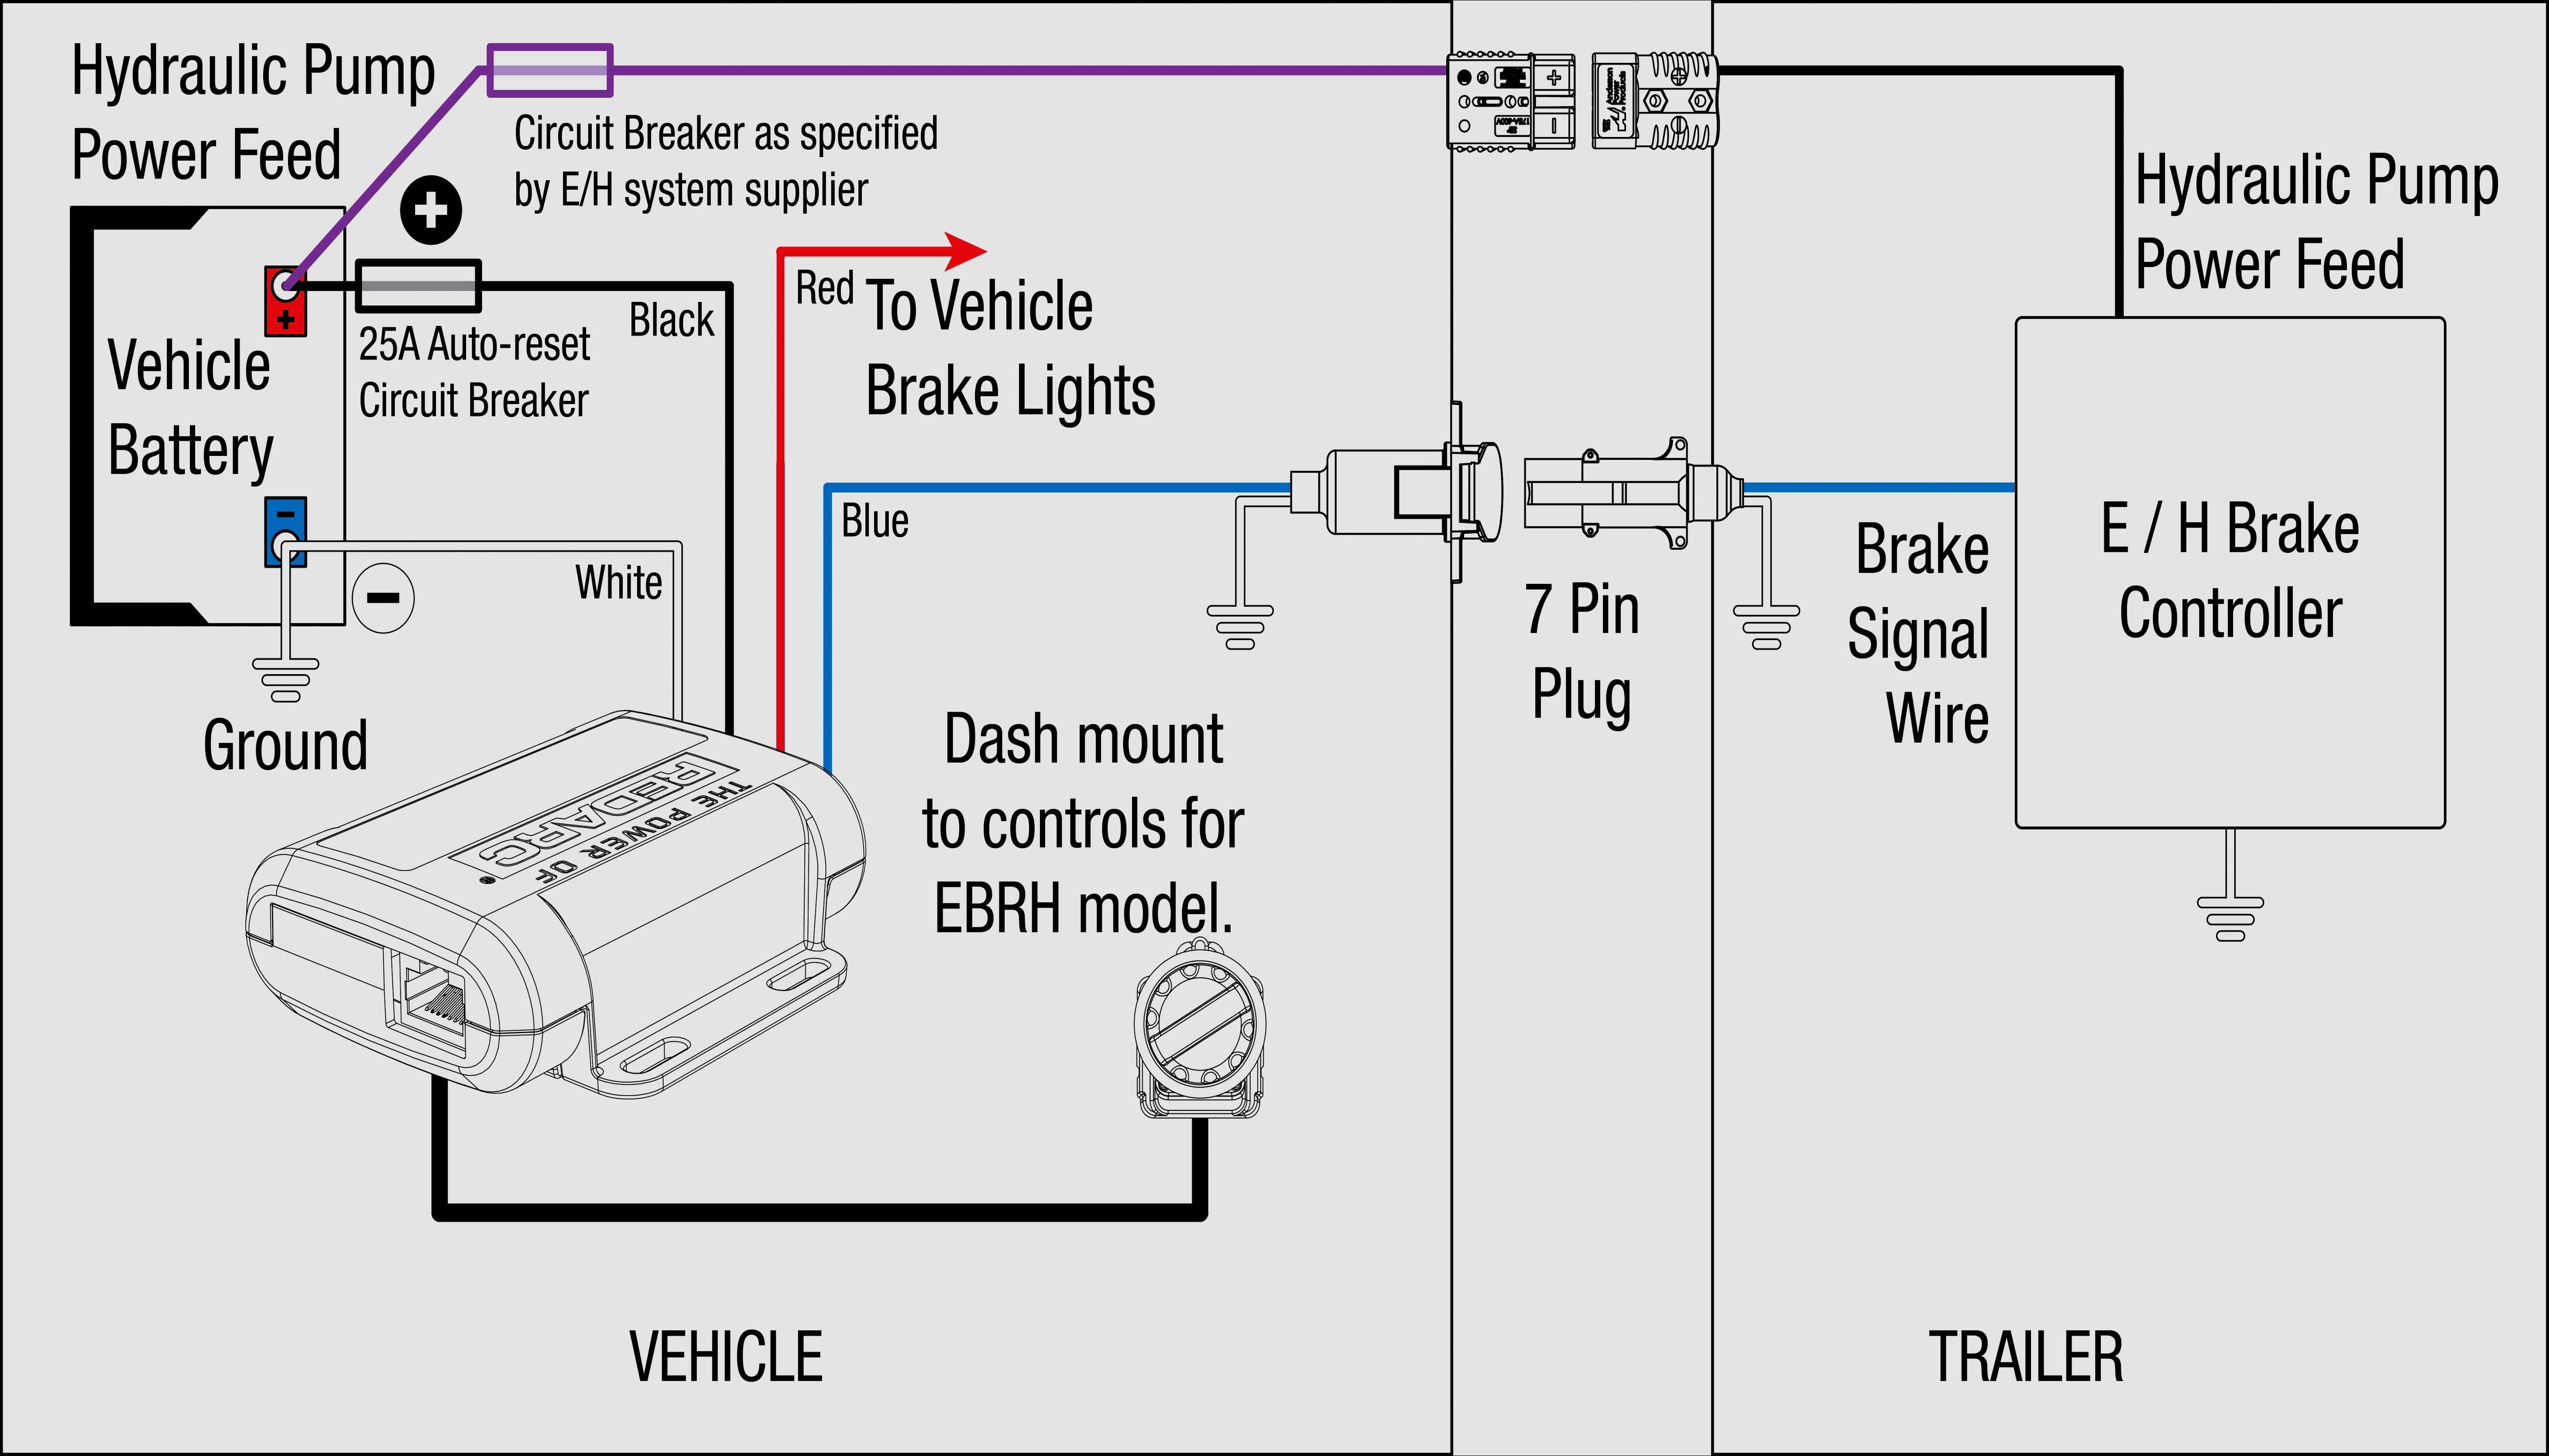 Trailer Wiring Diagram with Electric Brakes Power Ke Wiring Diagram Schema Wiring Diagram Of Trailer Wiring Diagram with Electric Brakes